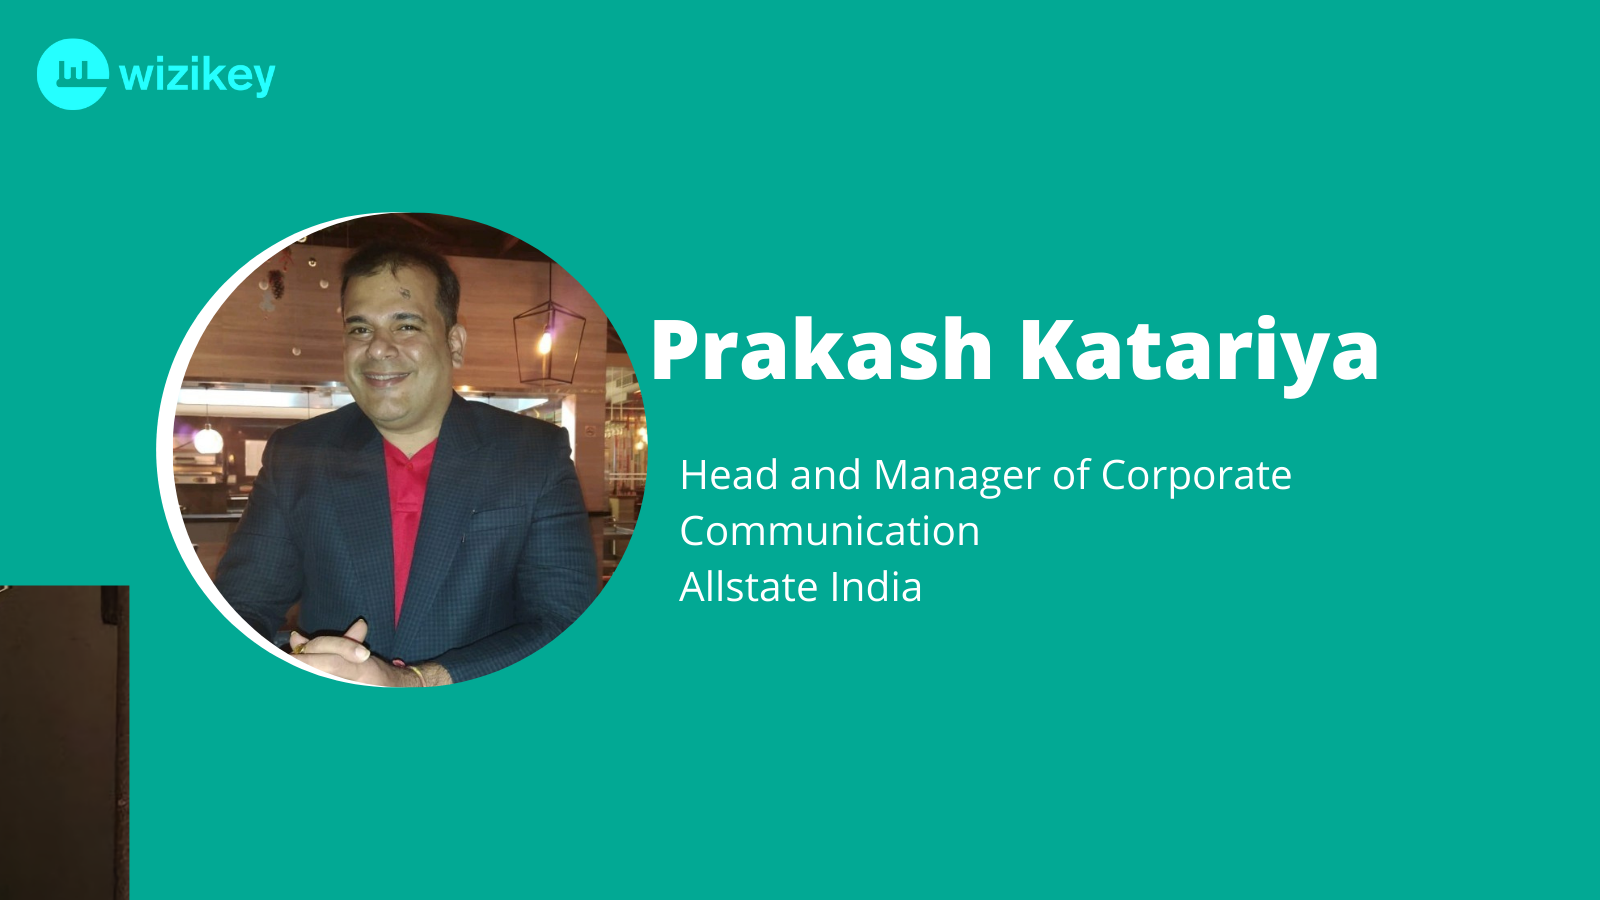 A multi-channel approach is what we will need: Prakash Katariya from Allstate India